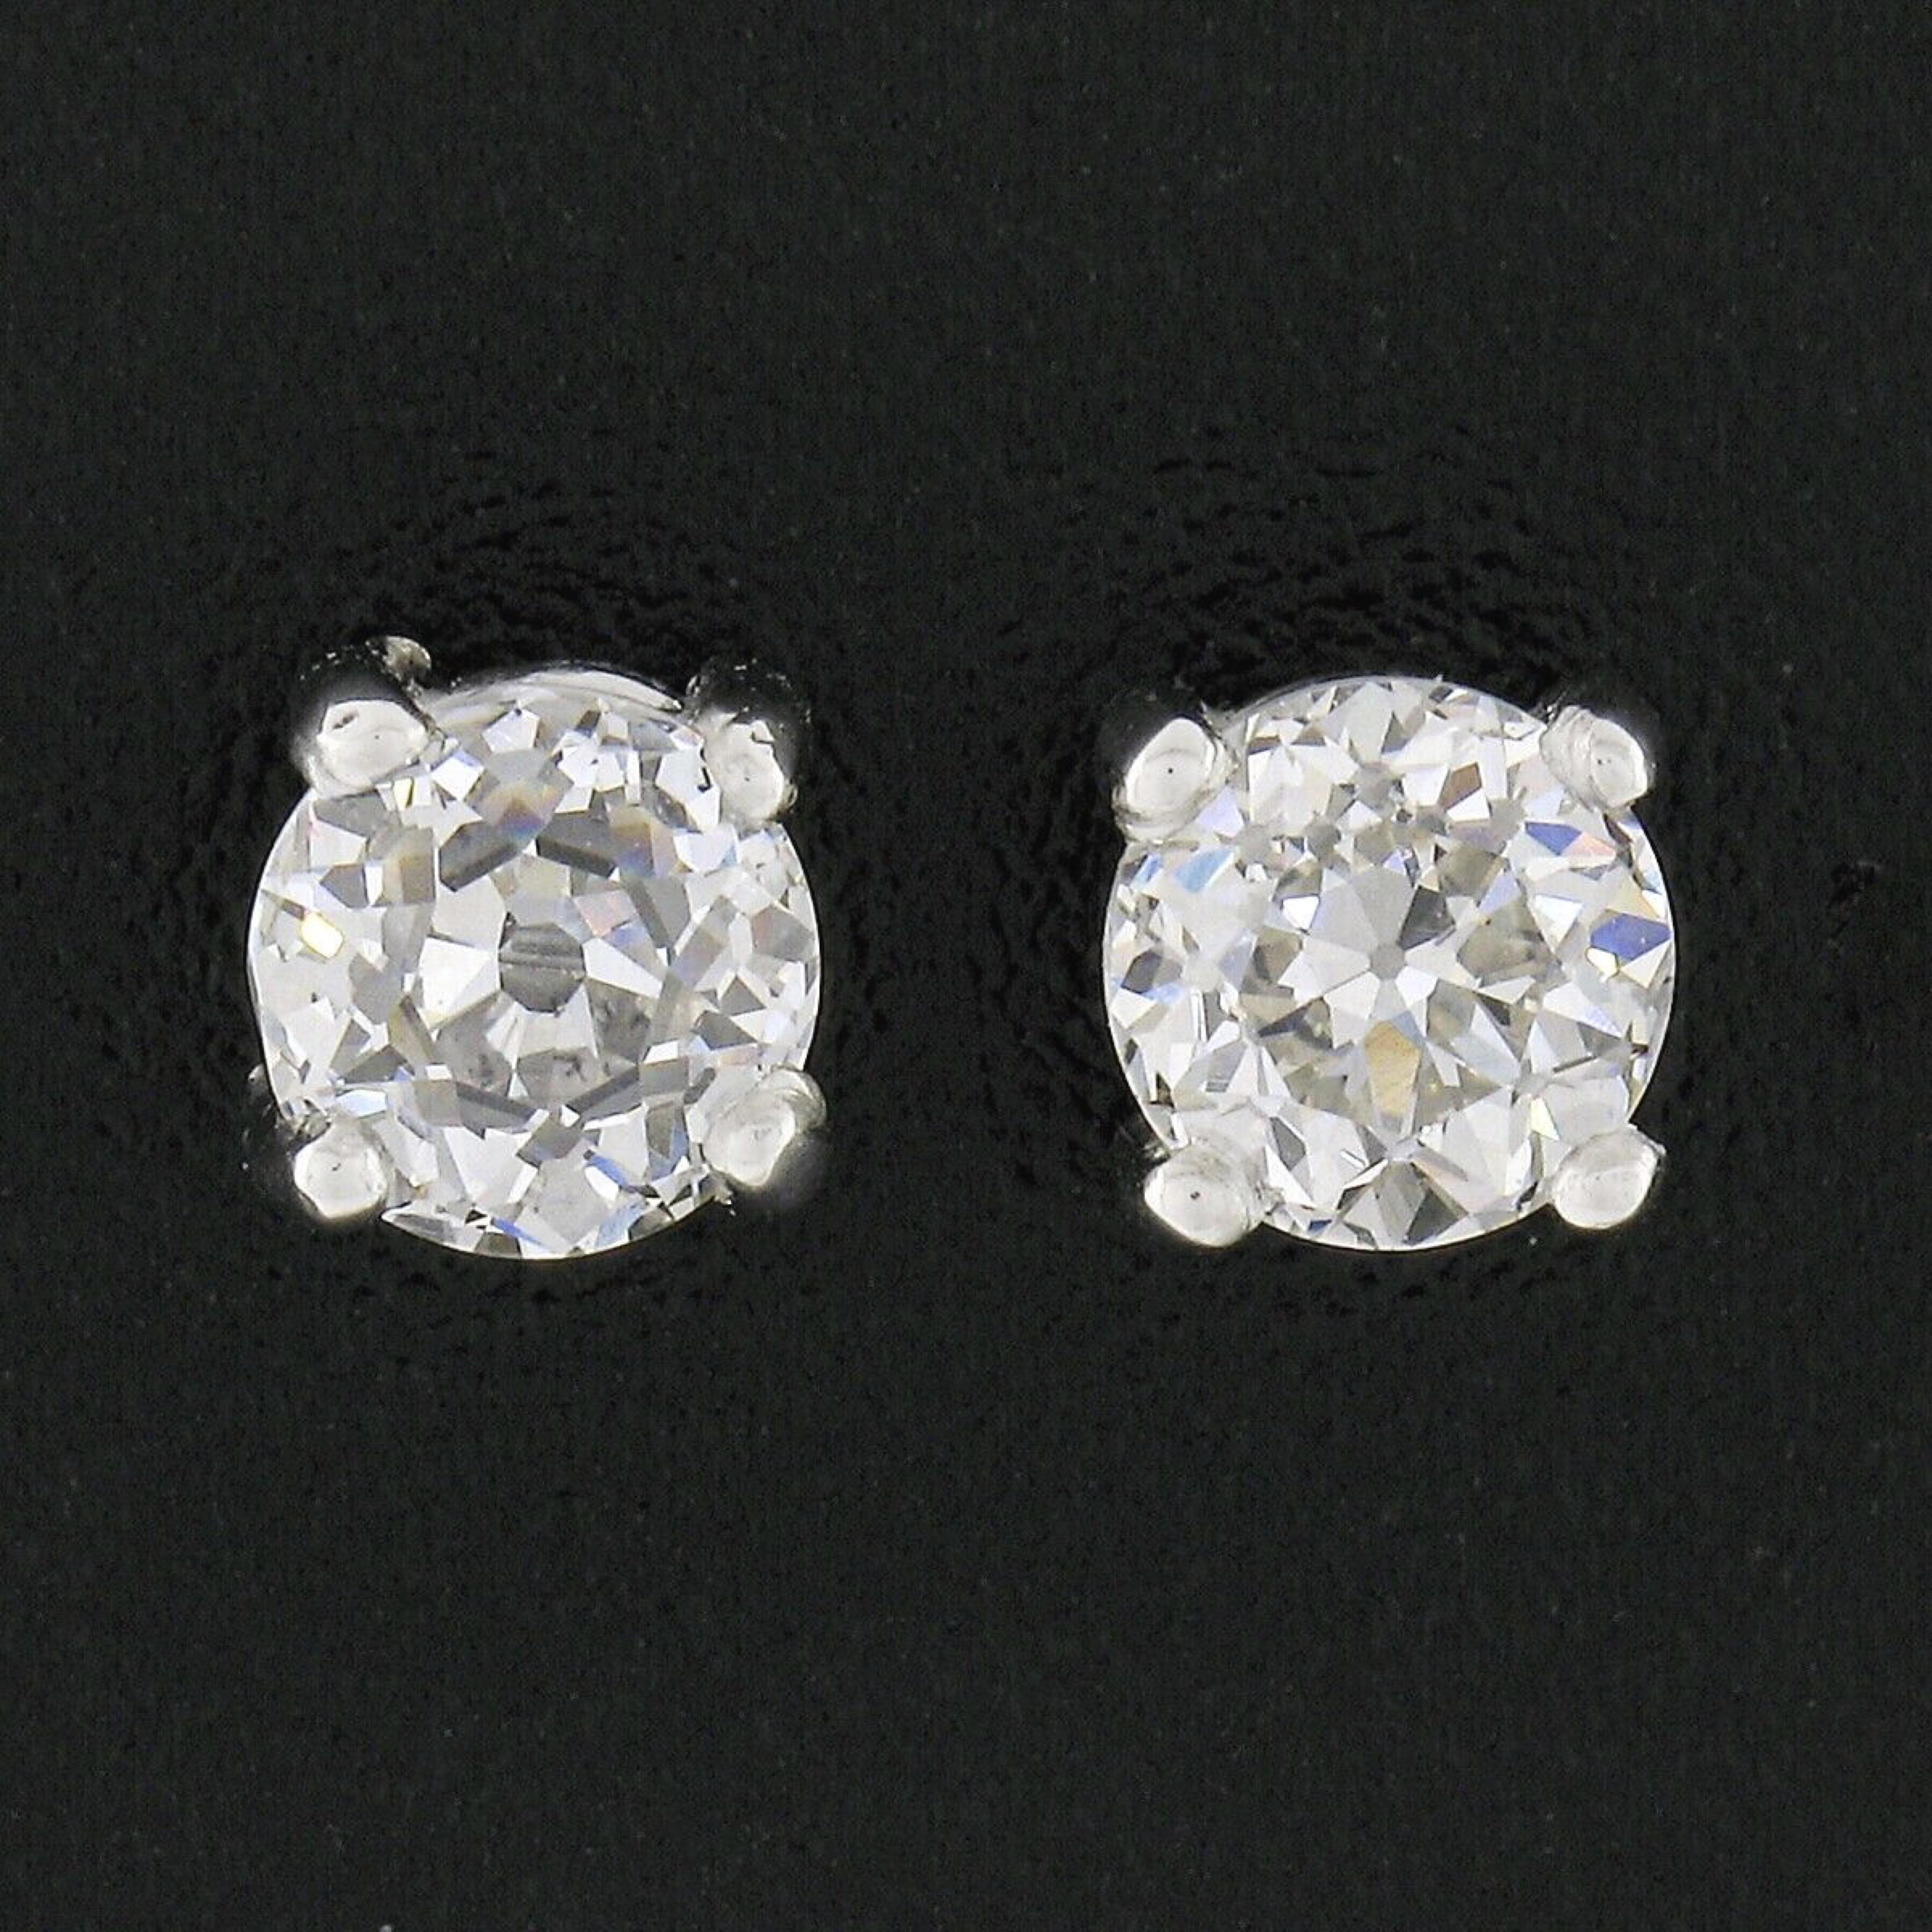 Here we have an outstanding pair of classically styled diamond stud earrings. They feature a pair of genuine, antique, diamonds that are each GIA certified with an old European and round brilliant cut, weighing a total of exactly 1.02 carats in